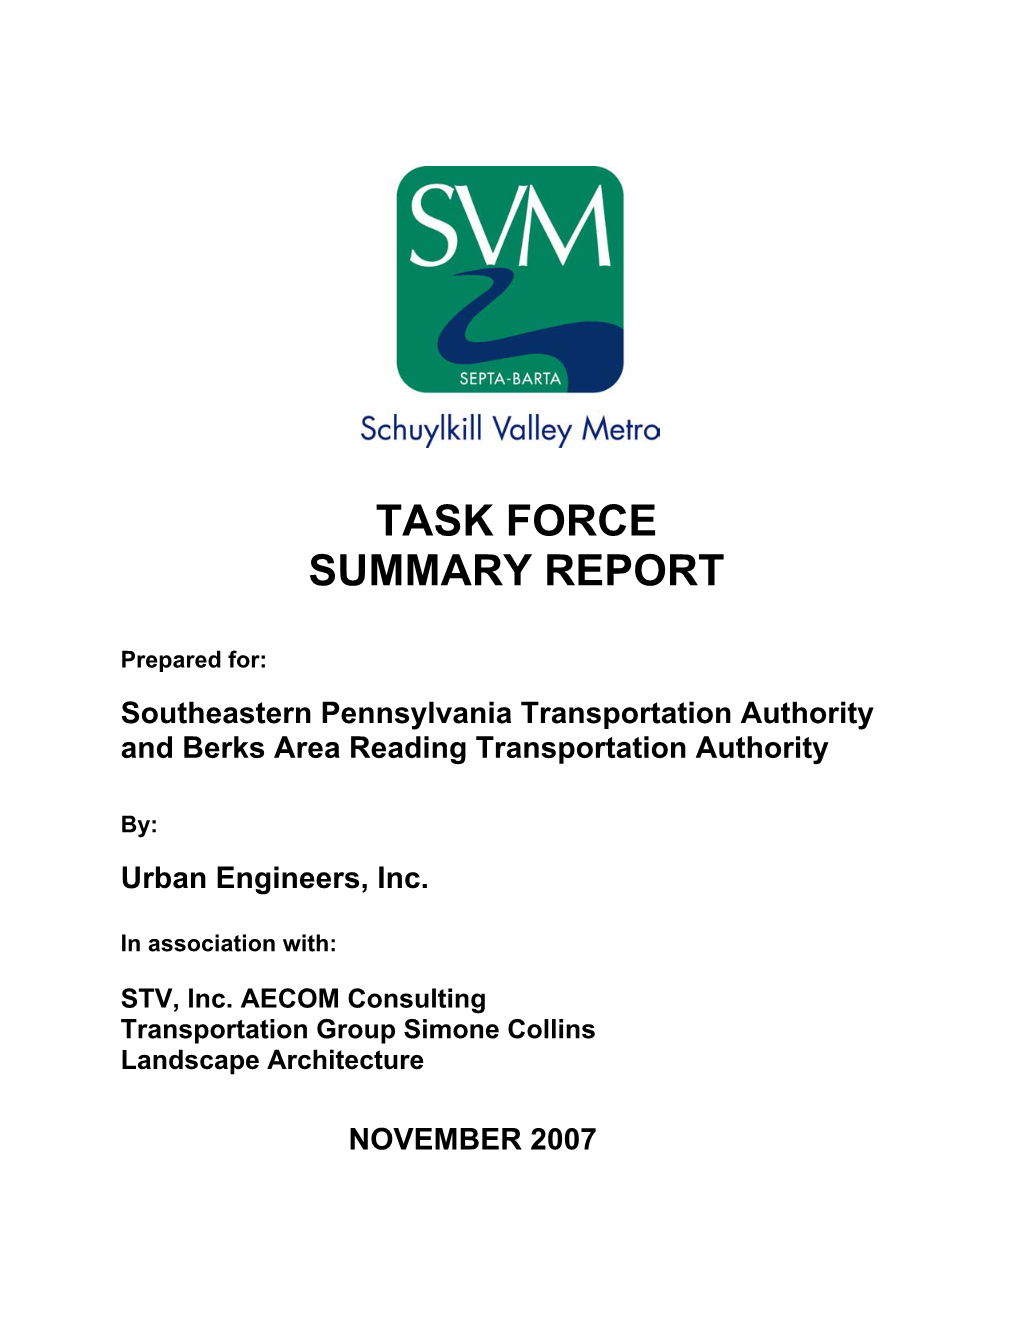 Task Force Summary Report